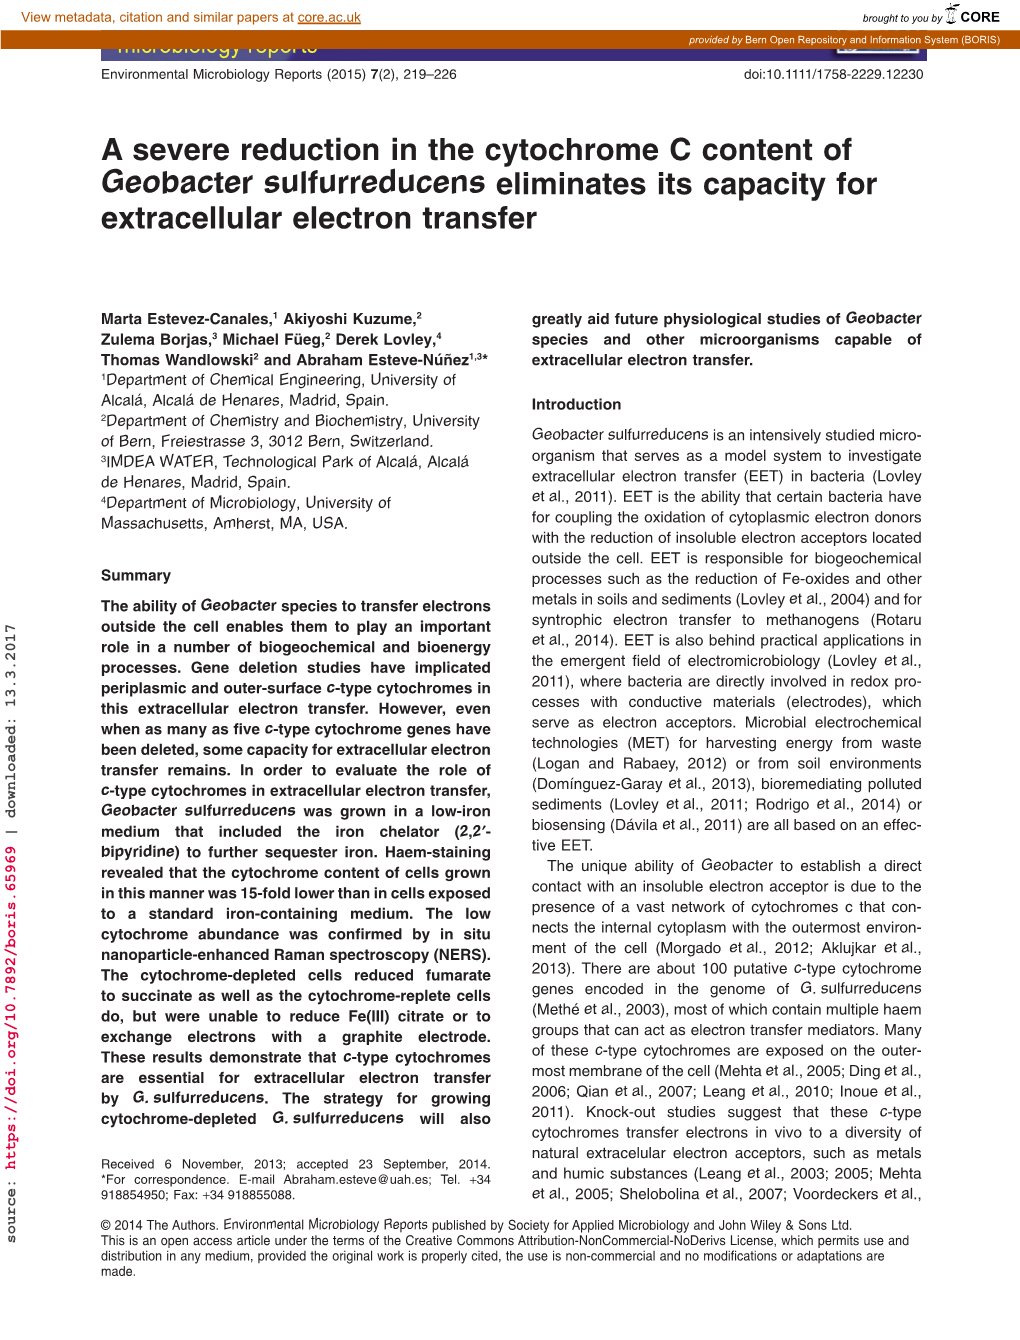 A Severe Reduction in the Cytochrome C Content of Geobacter Sulfurreducens Eliminates Its Capacity for Extracellular Electron Transfer